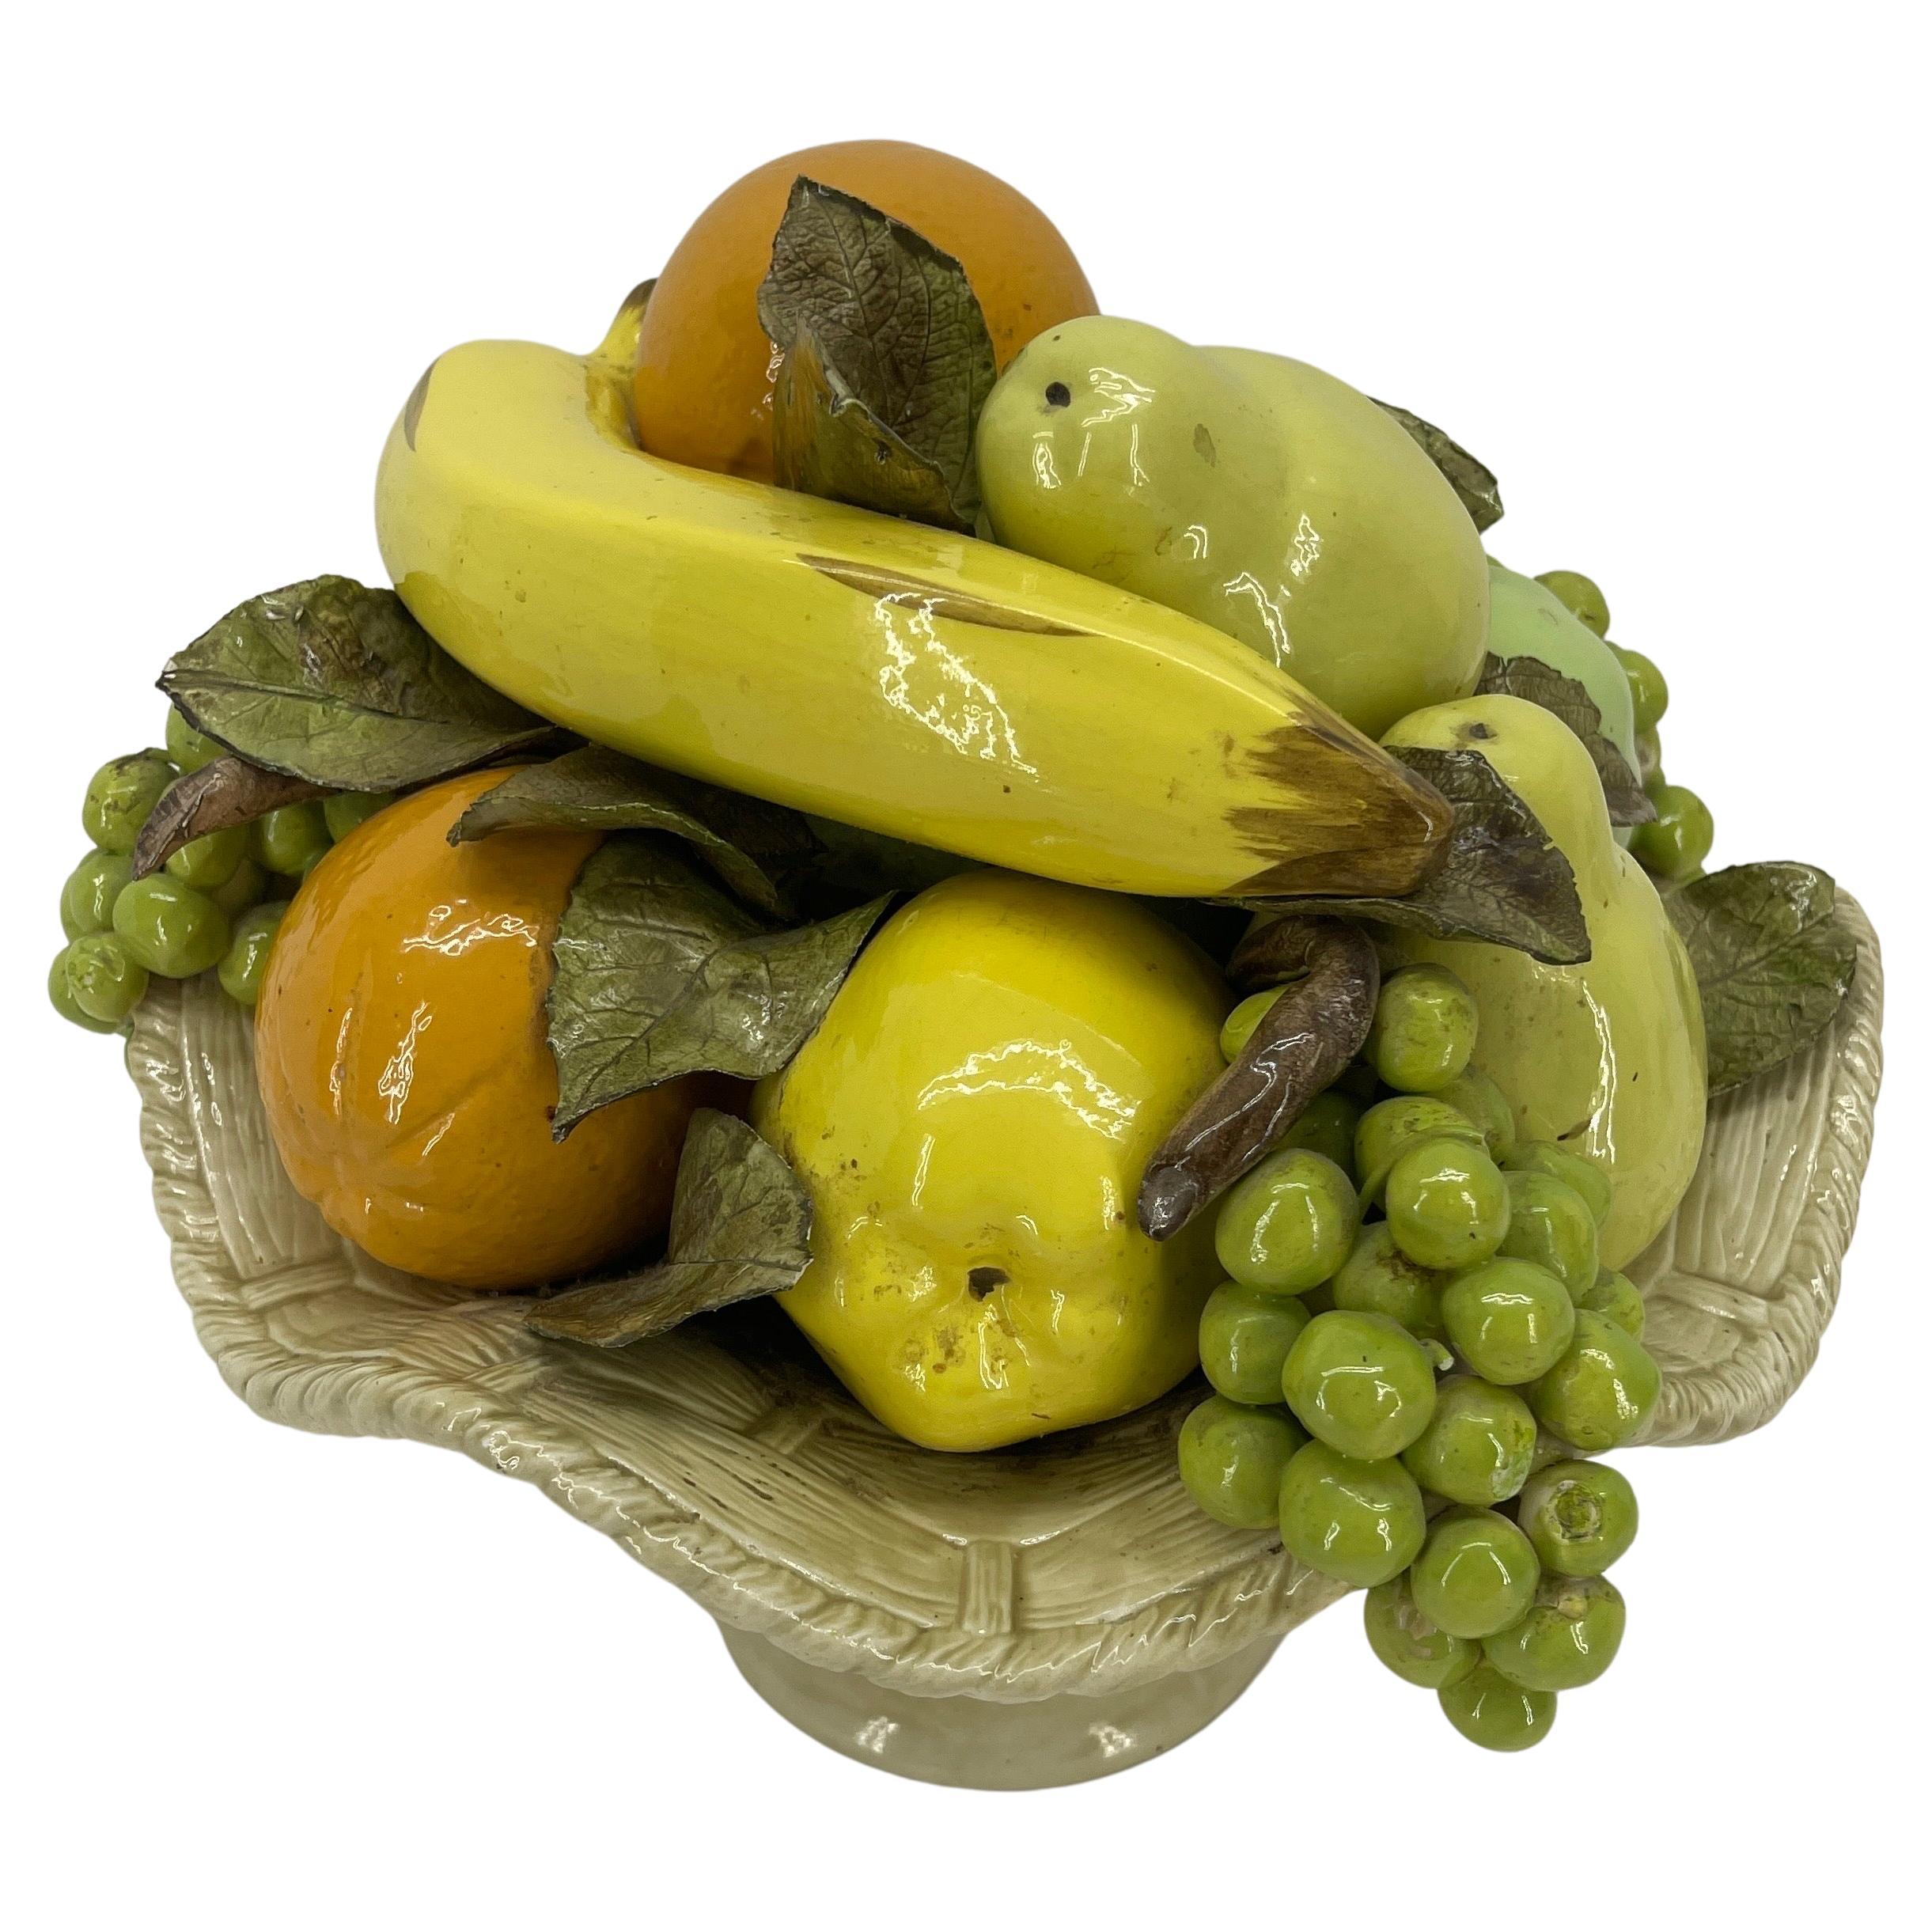 Vintage Glazed Ceramic Fruit Basket Compote Sculpture Centerpiece, 1950's Italy

Fabulous Italian glazed ceramic fruit basket figure. This polychrome compote is handmade with the greatest attention to detail. The basket itself with the intricate